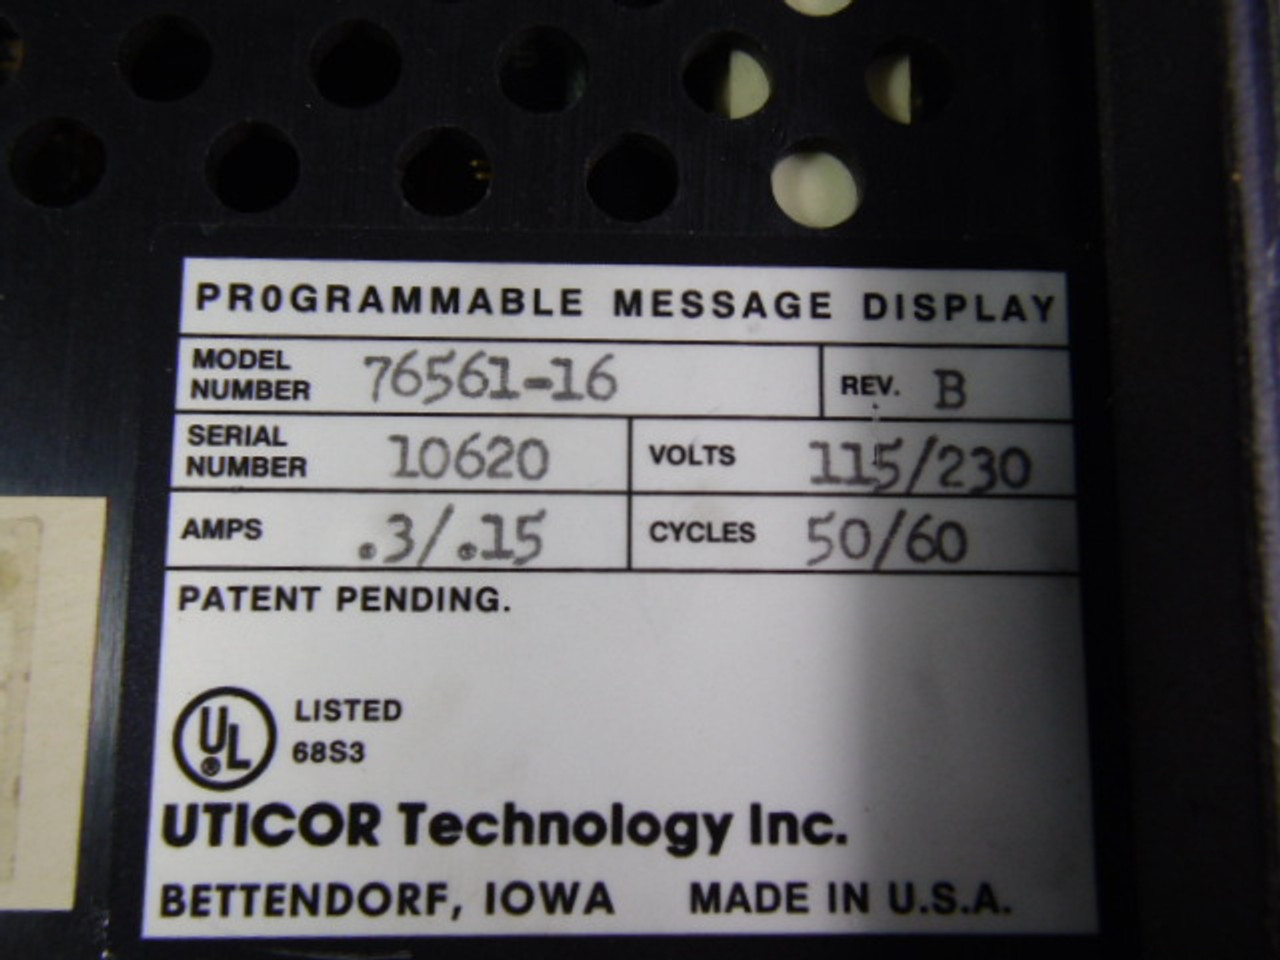 Uticor 76561-16 Programmable Message Display 115/230V .3/.15A USED